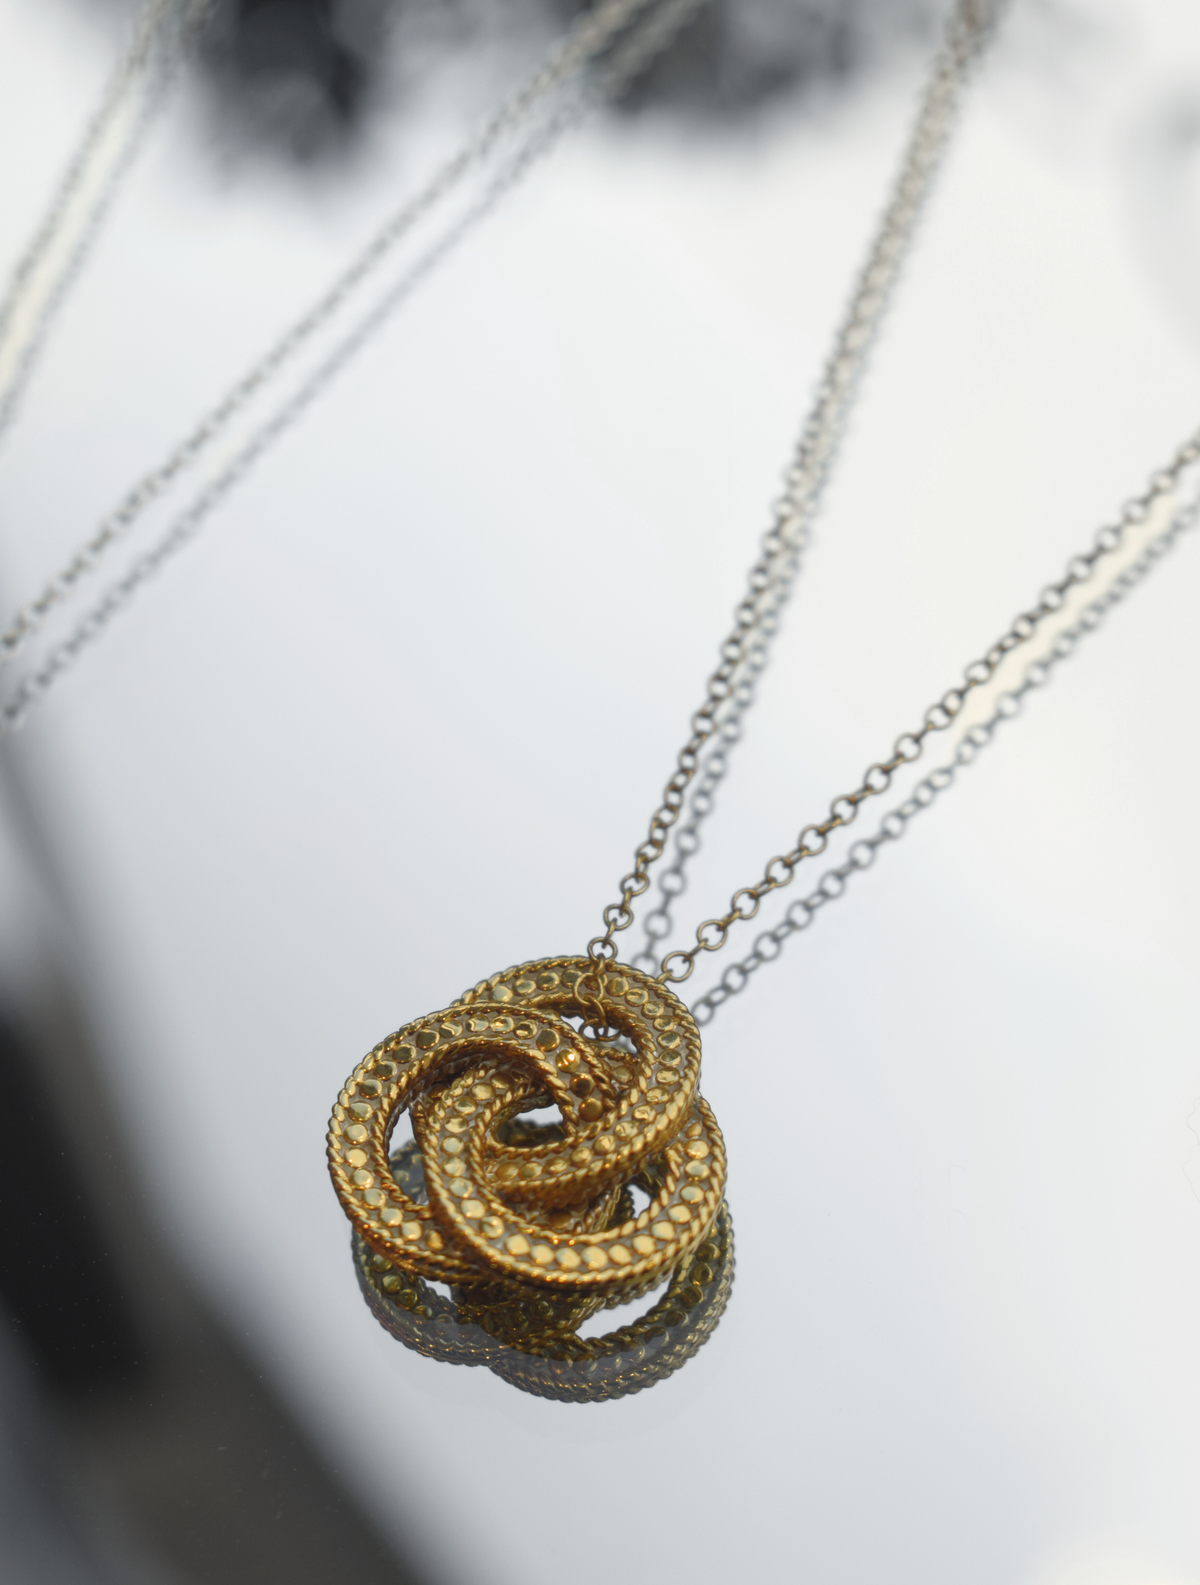 Three woven gold plated ring pendant on a gold chain